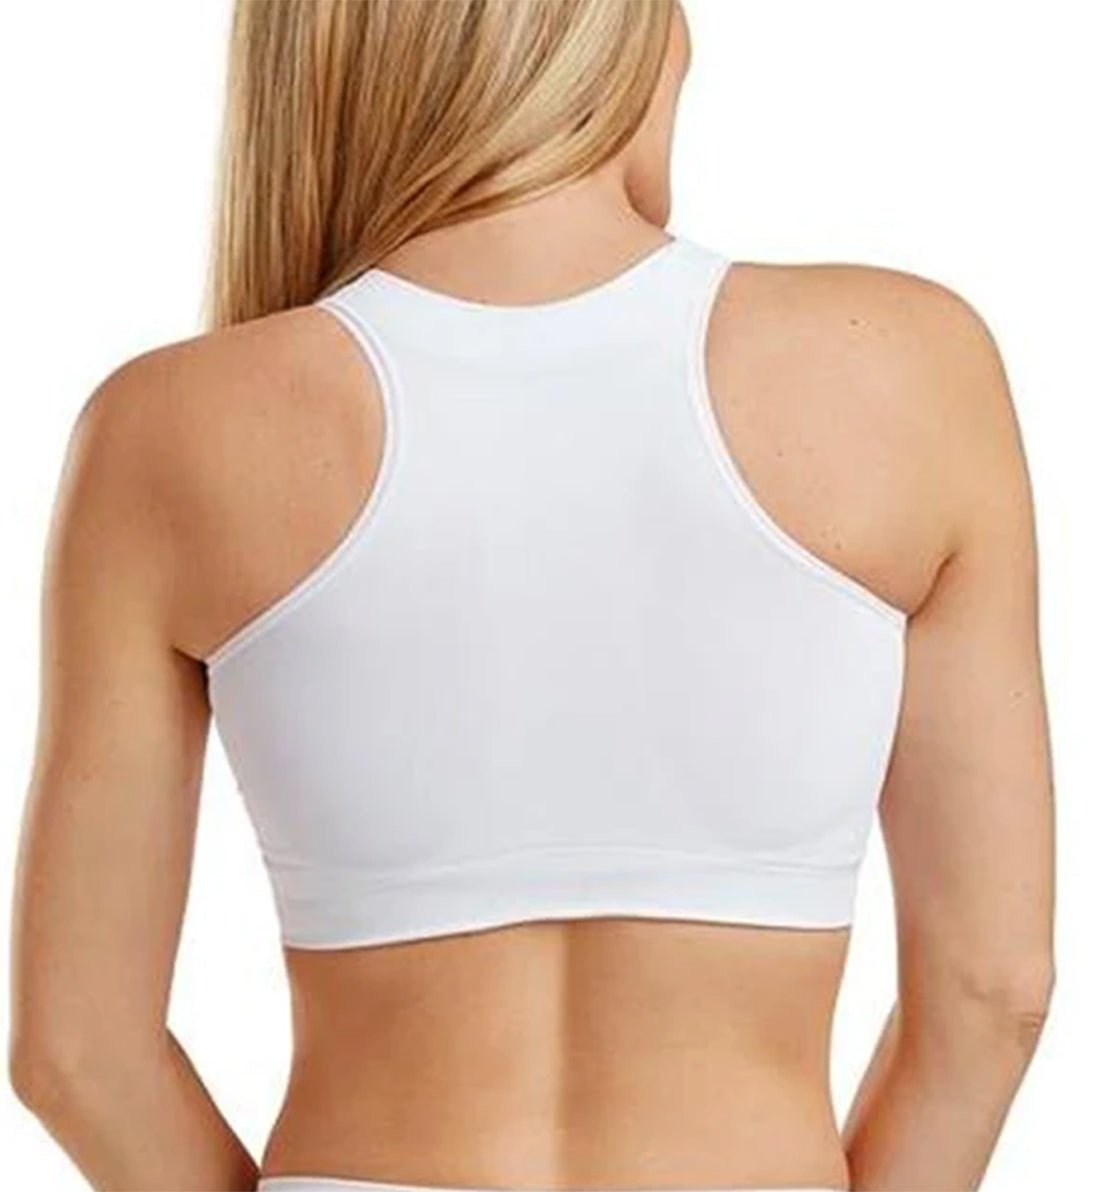 Carefix Ava Seamless Front Close Post-Op Surgical Bra (3444)- White